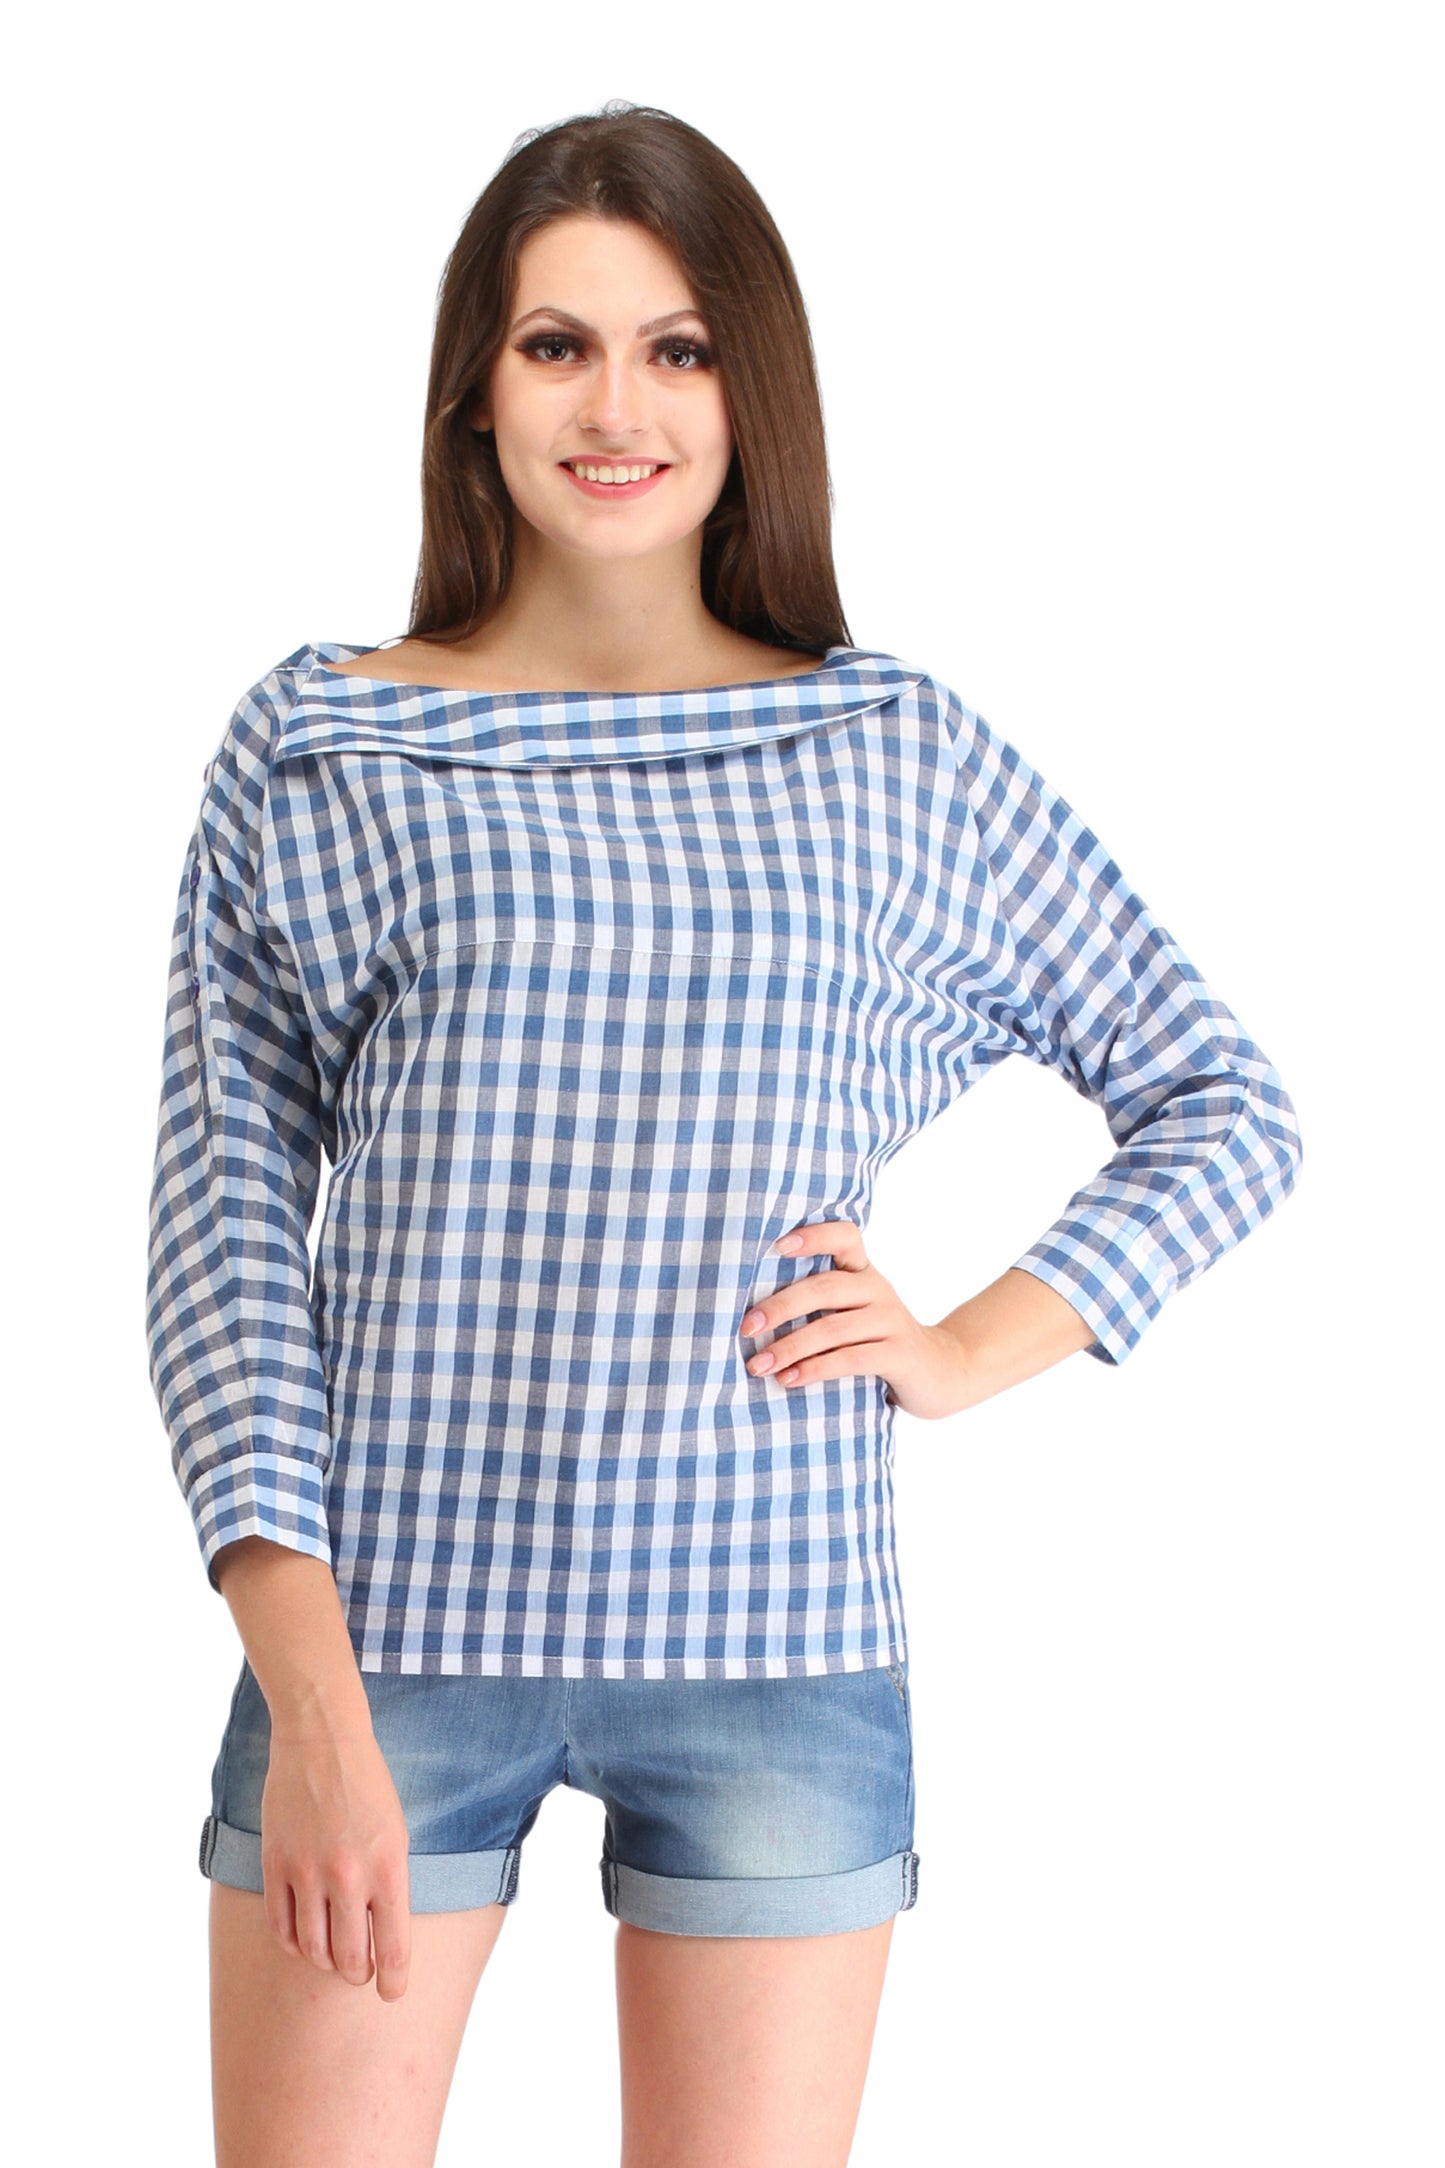 Cation Blue Checkered Top